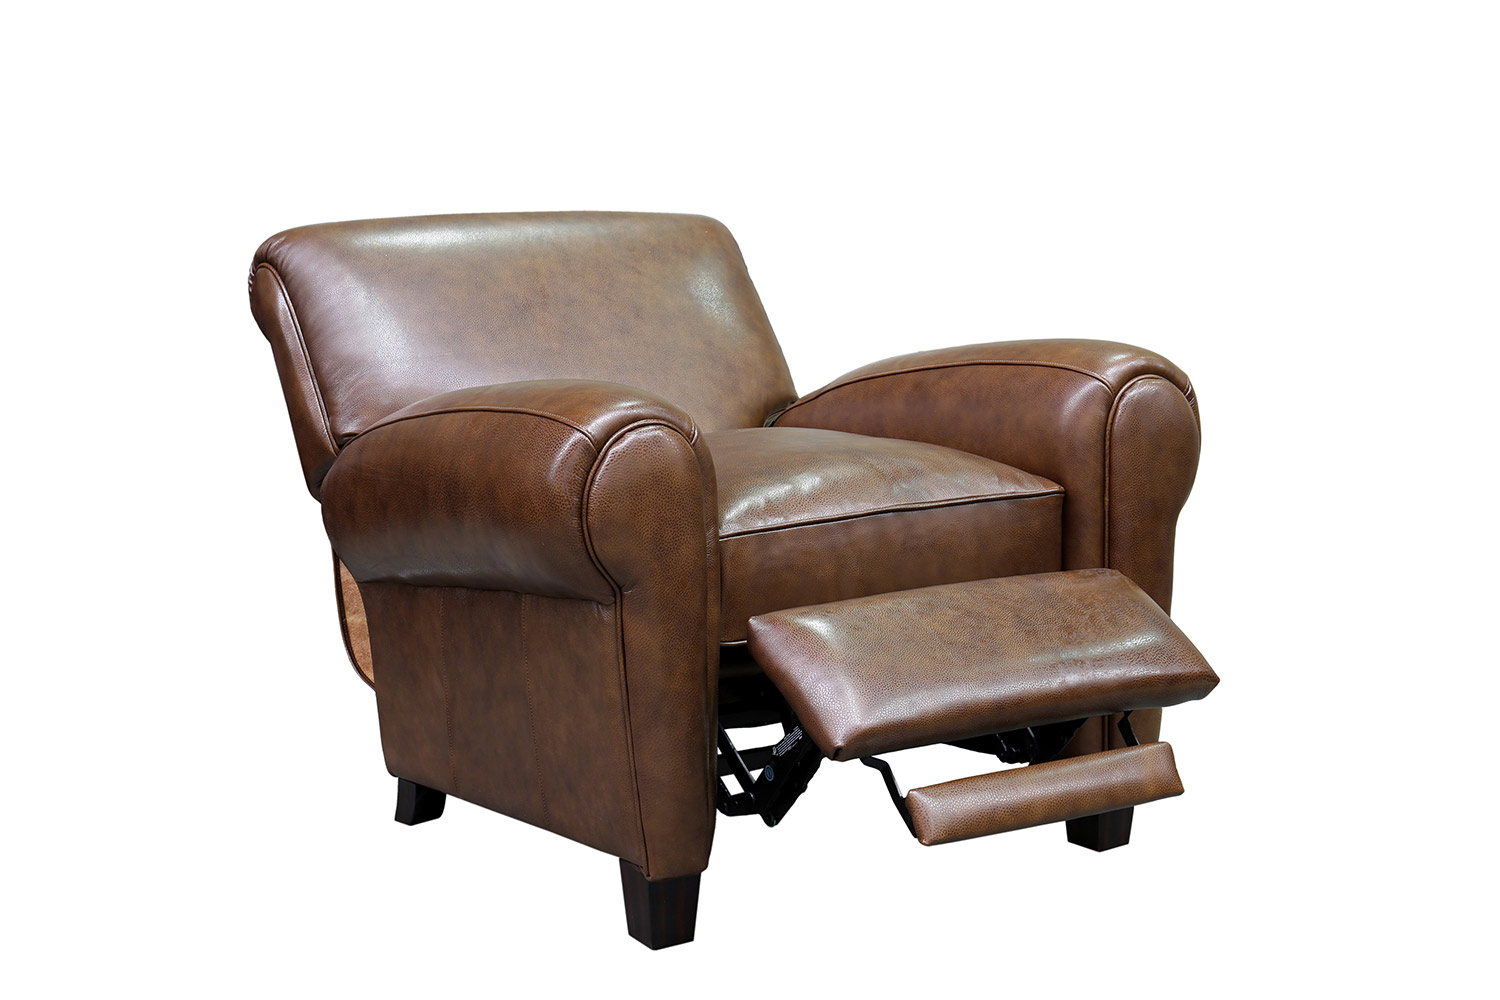 Barcalounger Edwin Recliner Chair - Wenlock Double Chocolate/All Leather